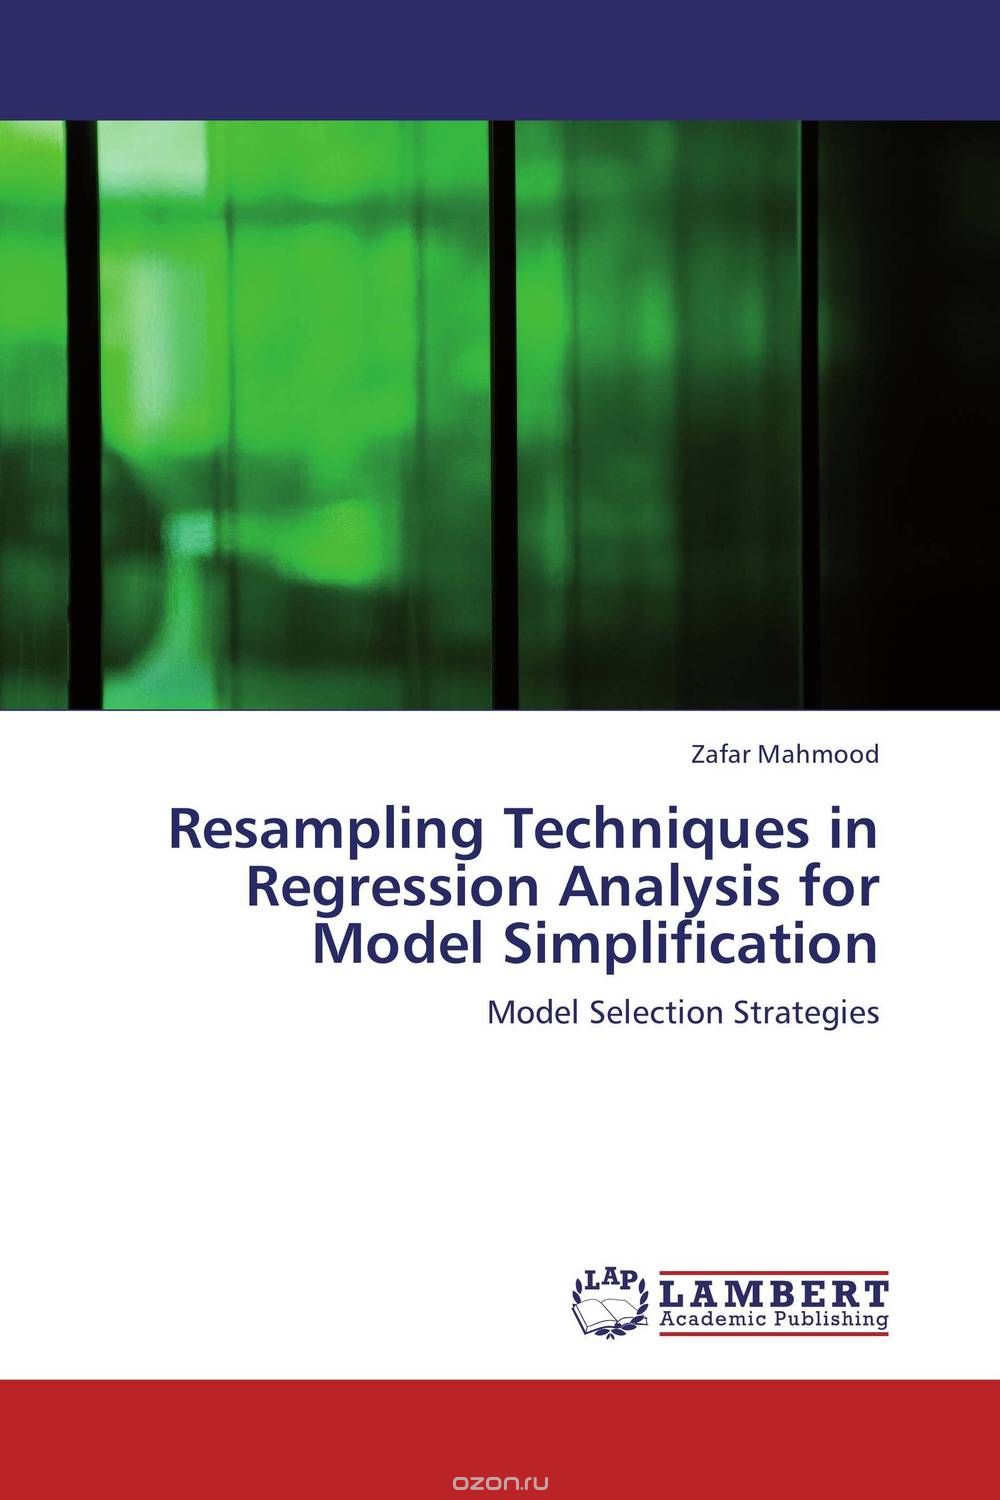 Resampling Techniques in Regression Analysis for Model Simplification